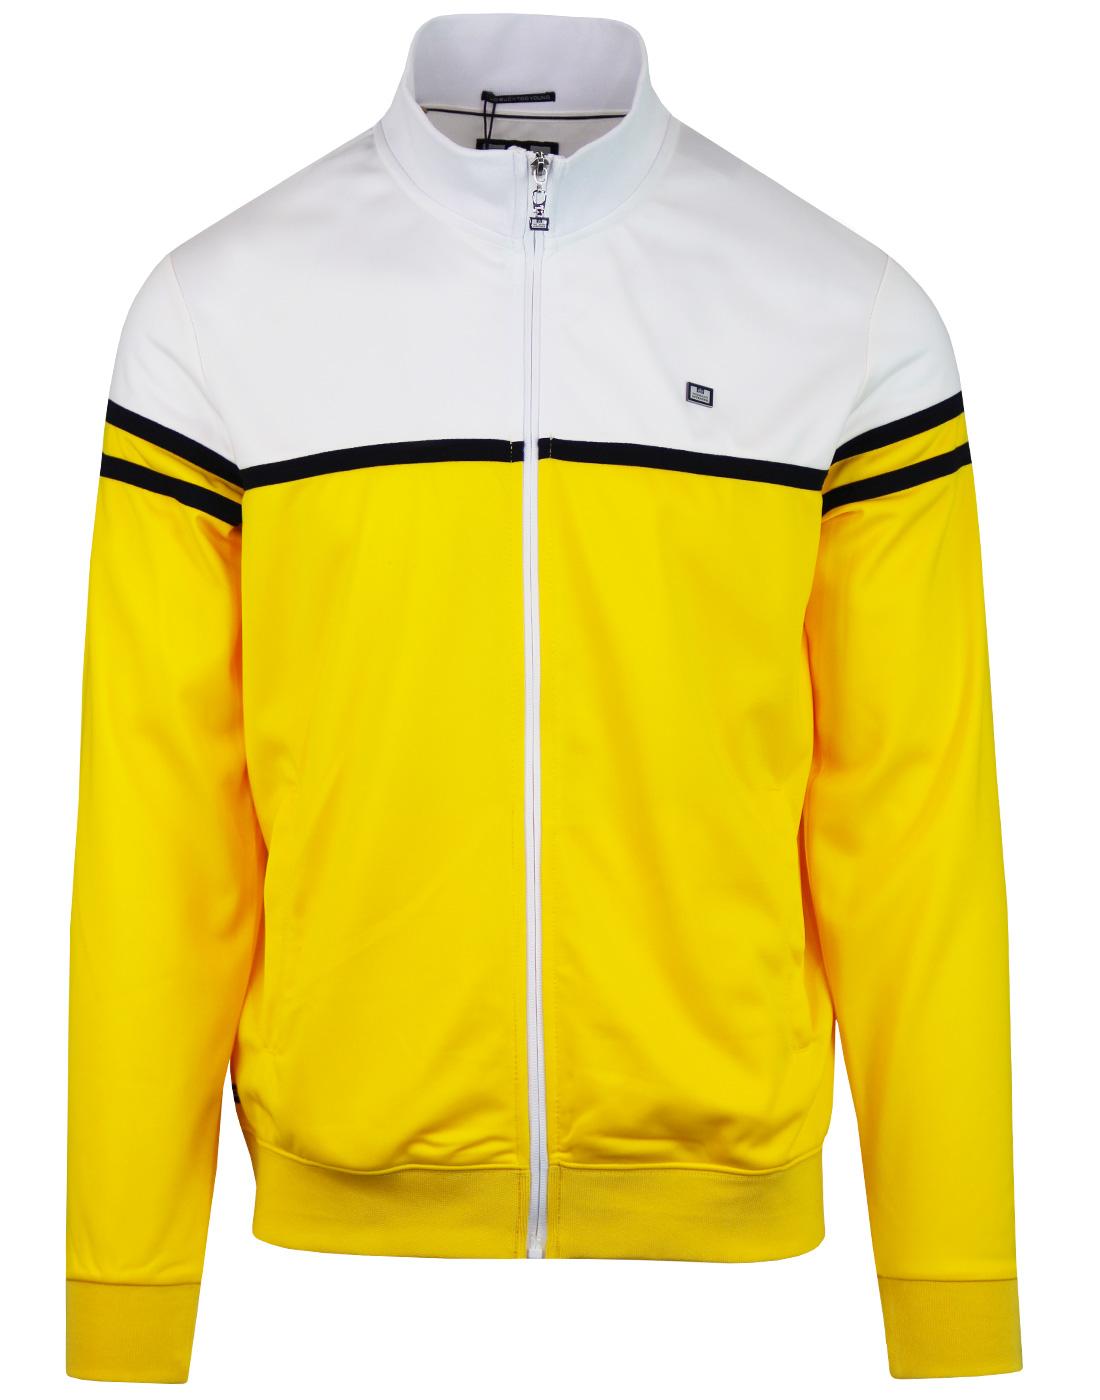 Steinbeck WEEKEND OFFENDER Retro 80s Track Top (L)